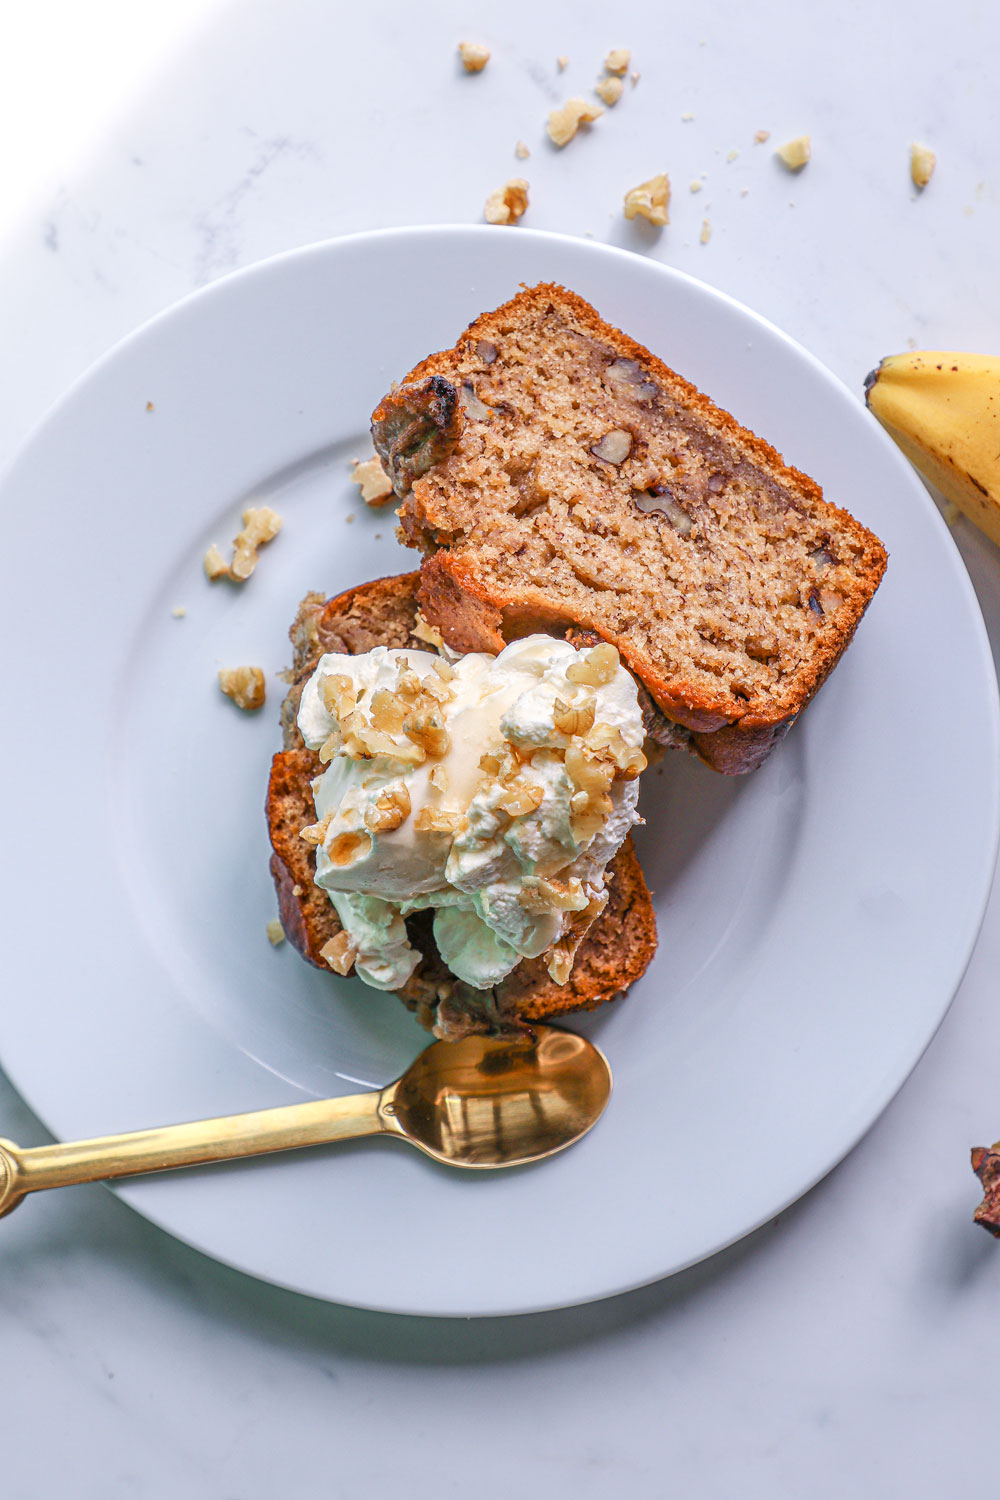 banana and walnut bread loaf slices topped with whipped cream , chopped walnuts and a drizzle of maple syrup